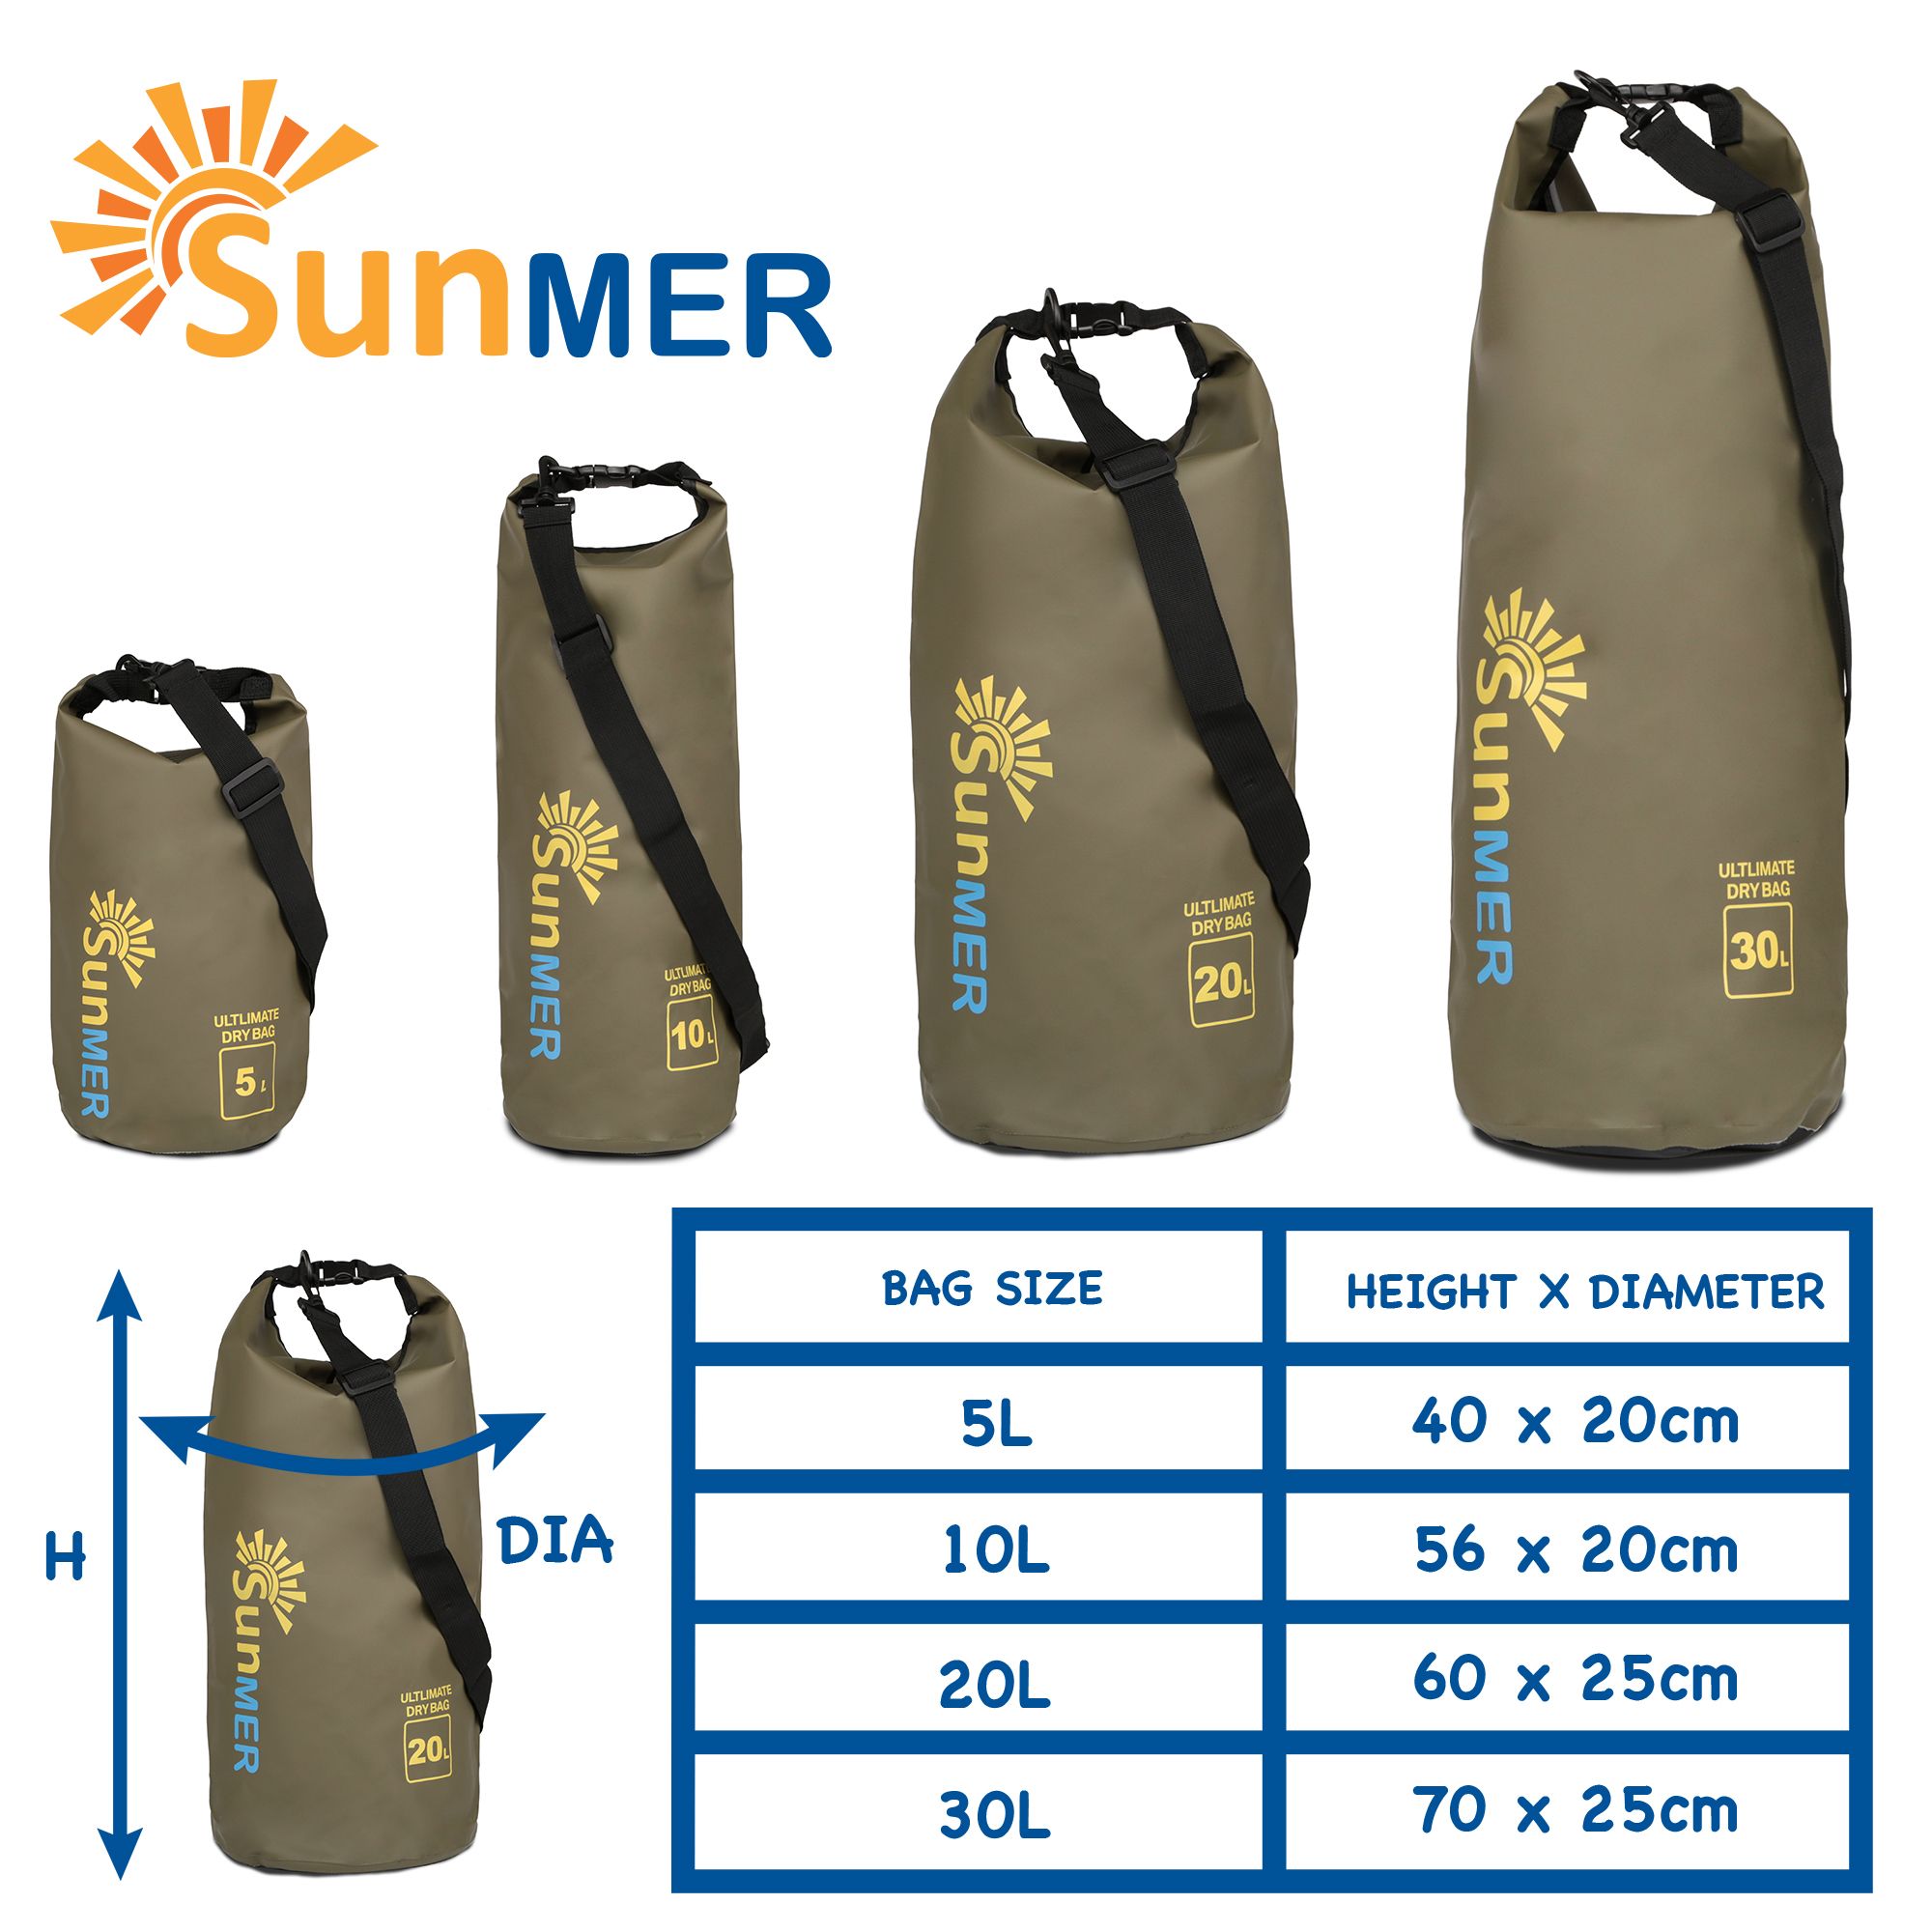 SUNMER 5L Dry Bag With Waterproof Phone Case - Army Green